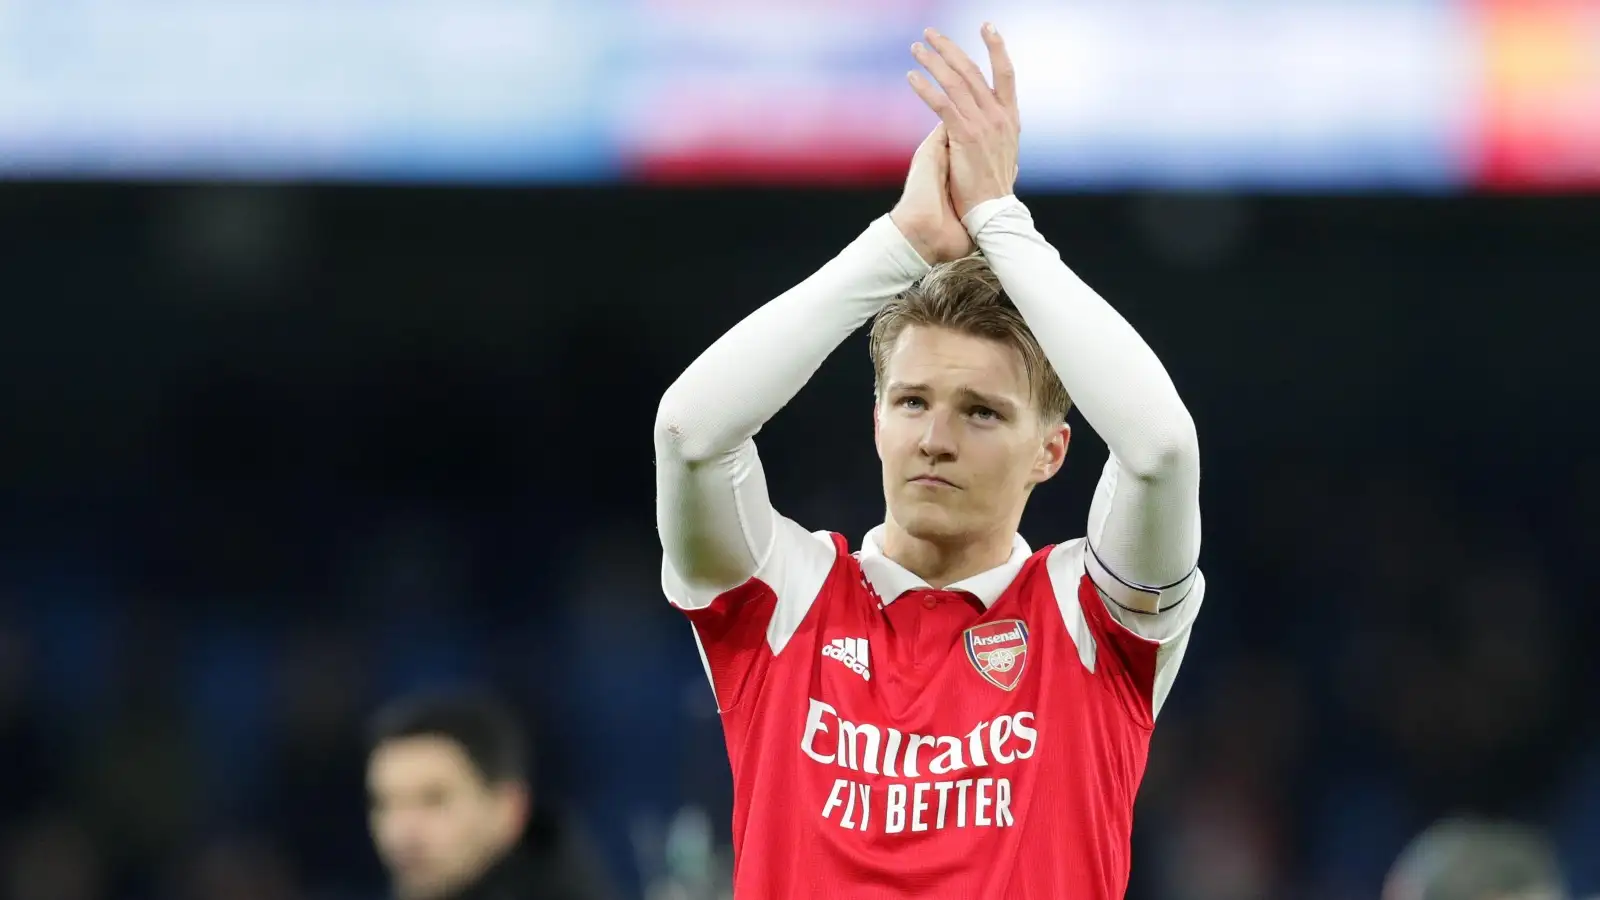 Watch: Martin Odegaard rages at Arsenal team-mate during Cup exit